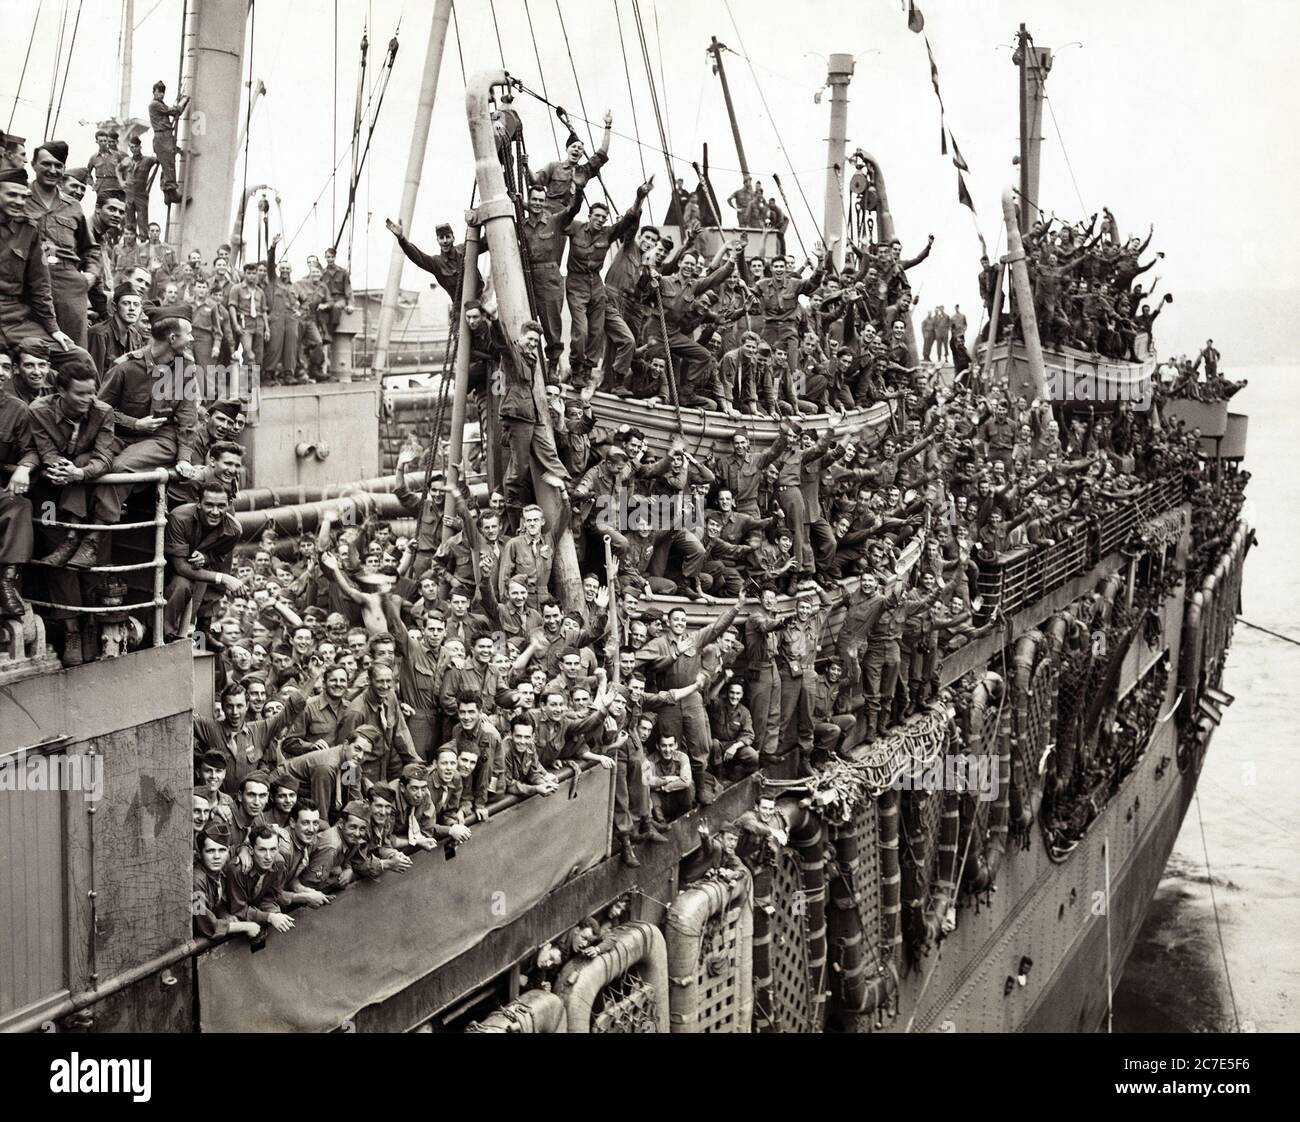 American Soldiers from 20th Armored Division and units of 9th Army, celebrate on SS John  Ericsson as they return home, Pier 87, North (Hudson) River, New York City, New York, USA, photo by Al Ravenna, World Telegram & Sun, August 6, 1945 Stock Photo